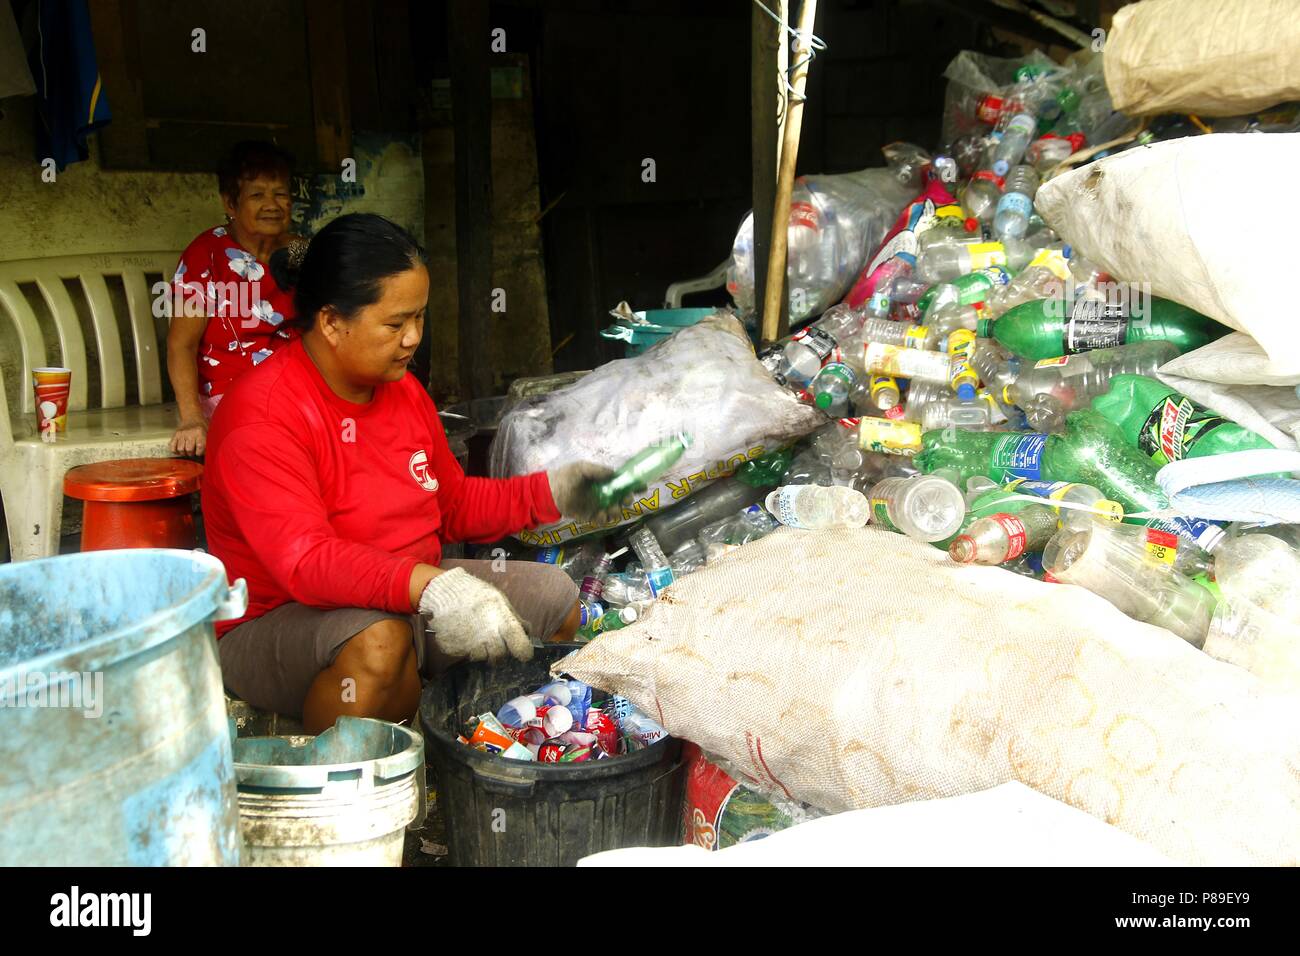 ANGONO, RIZAL, PHILIPPINES - JULY 4 2018: Workers of a materials recovery facility sort through plastic waste and segregate them for proper recycling. Stock Photo